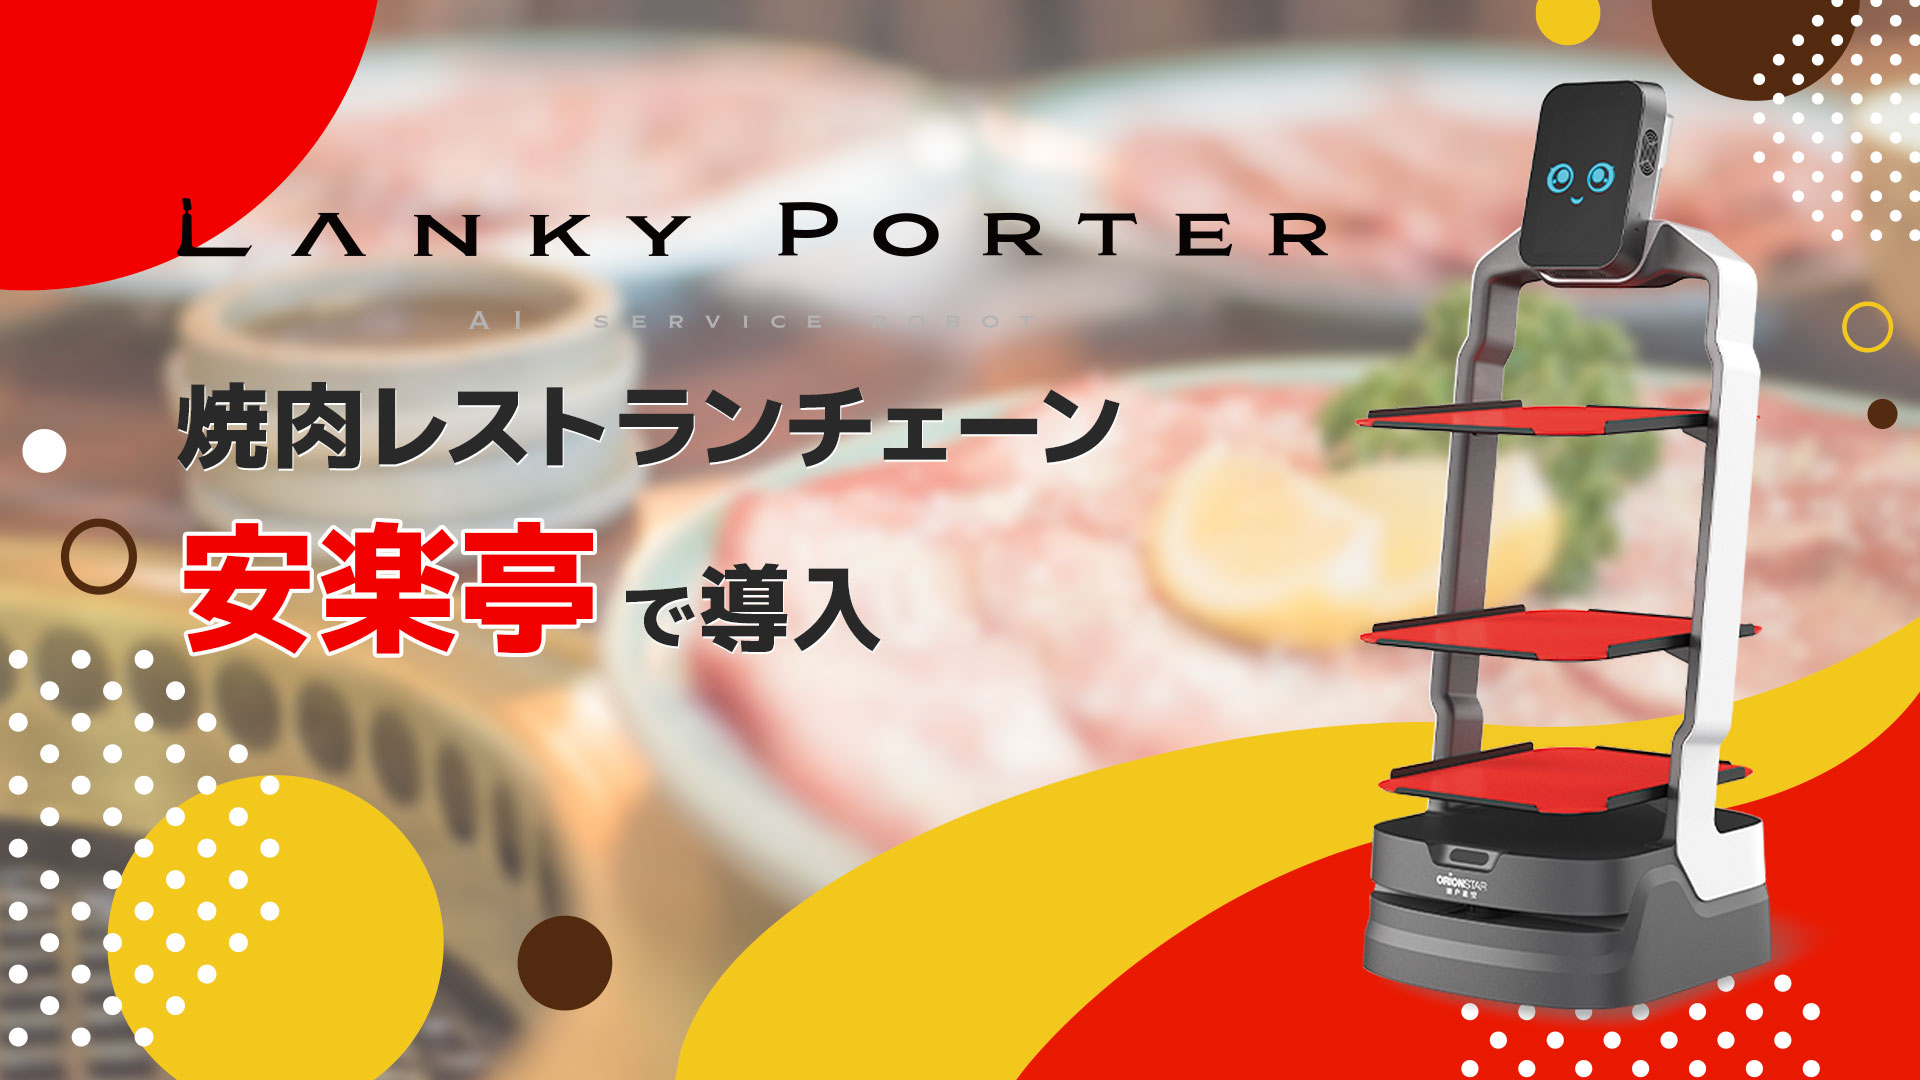 <strong>AI配膳ロボット「Lanky Porter」、焼肉レストランチェーン「安楽亭」で導入</strong>